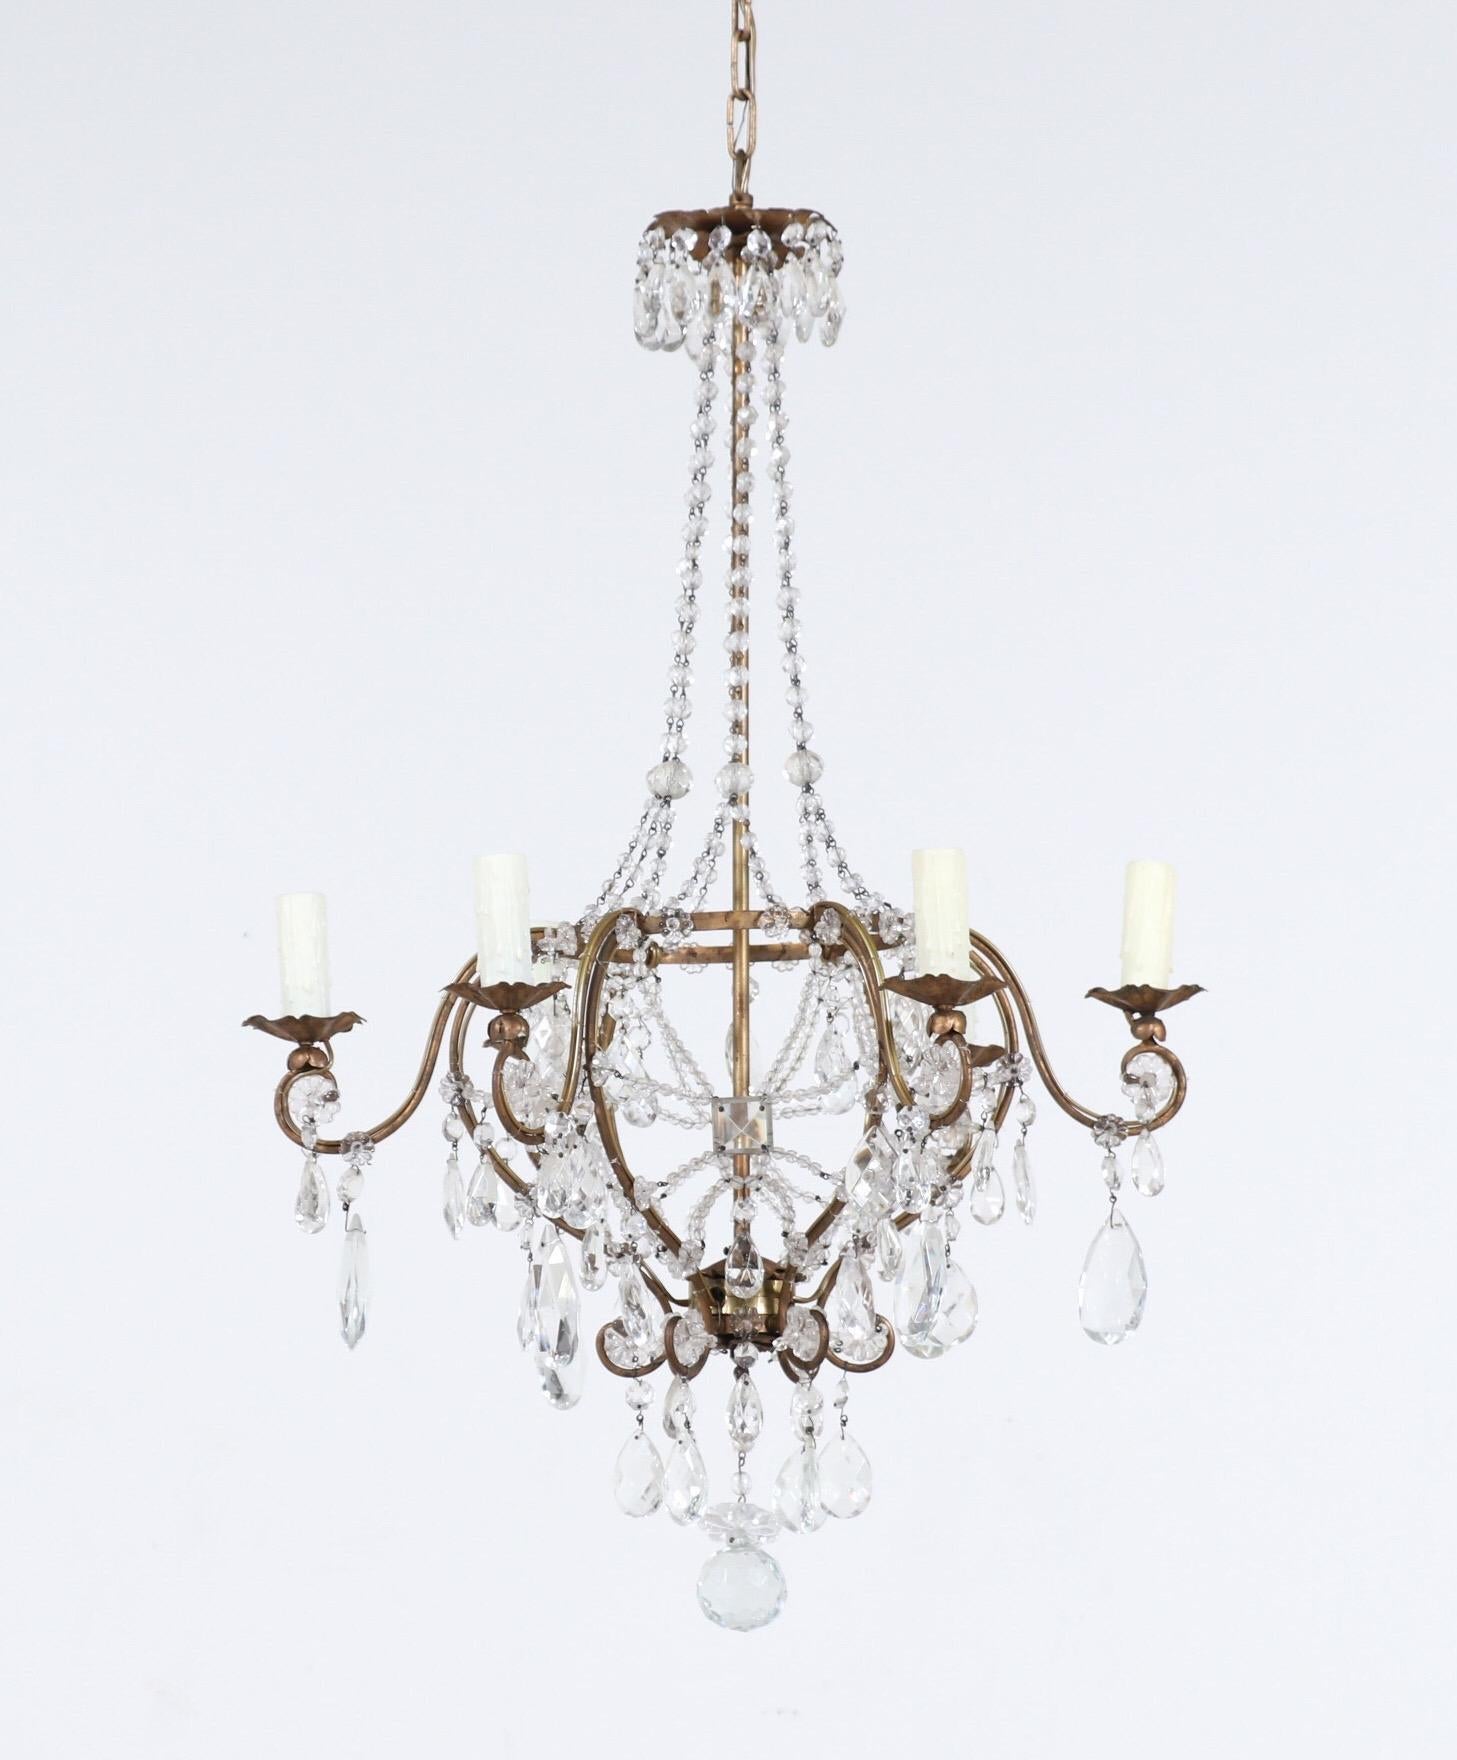 Beautiful, 1940s Italian gilt-iron and crystal beaded chandelier.

This chandelier features a delicately shaped wrought iron frame with intricate crystal beaded decorations. The chandelier is wired and in working condition, it requires 6